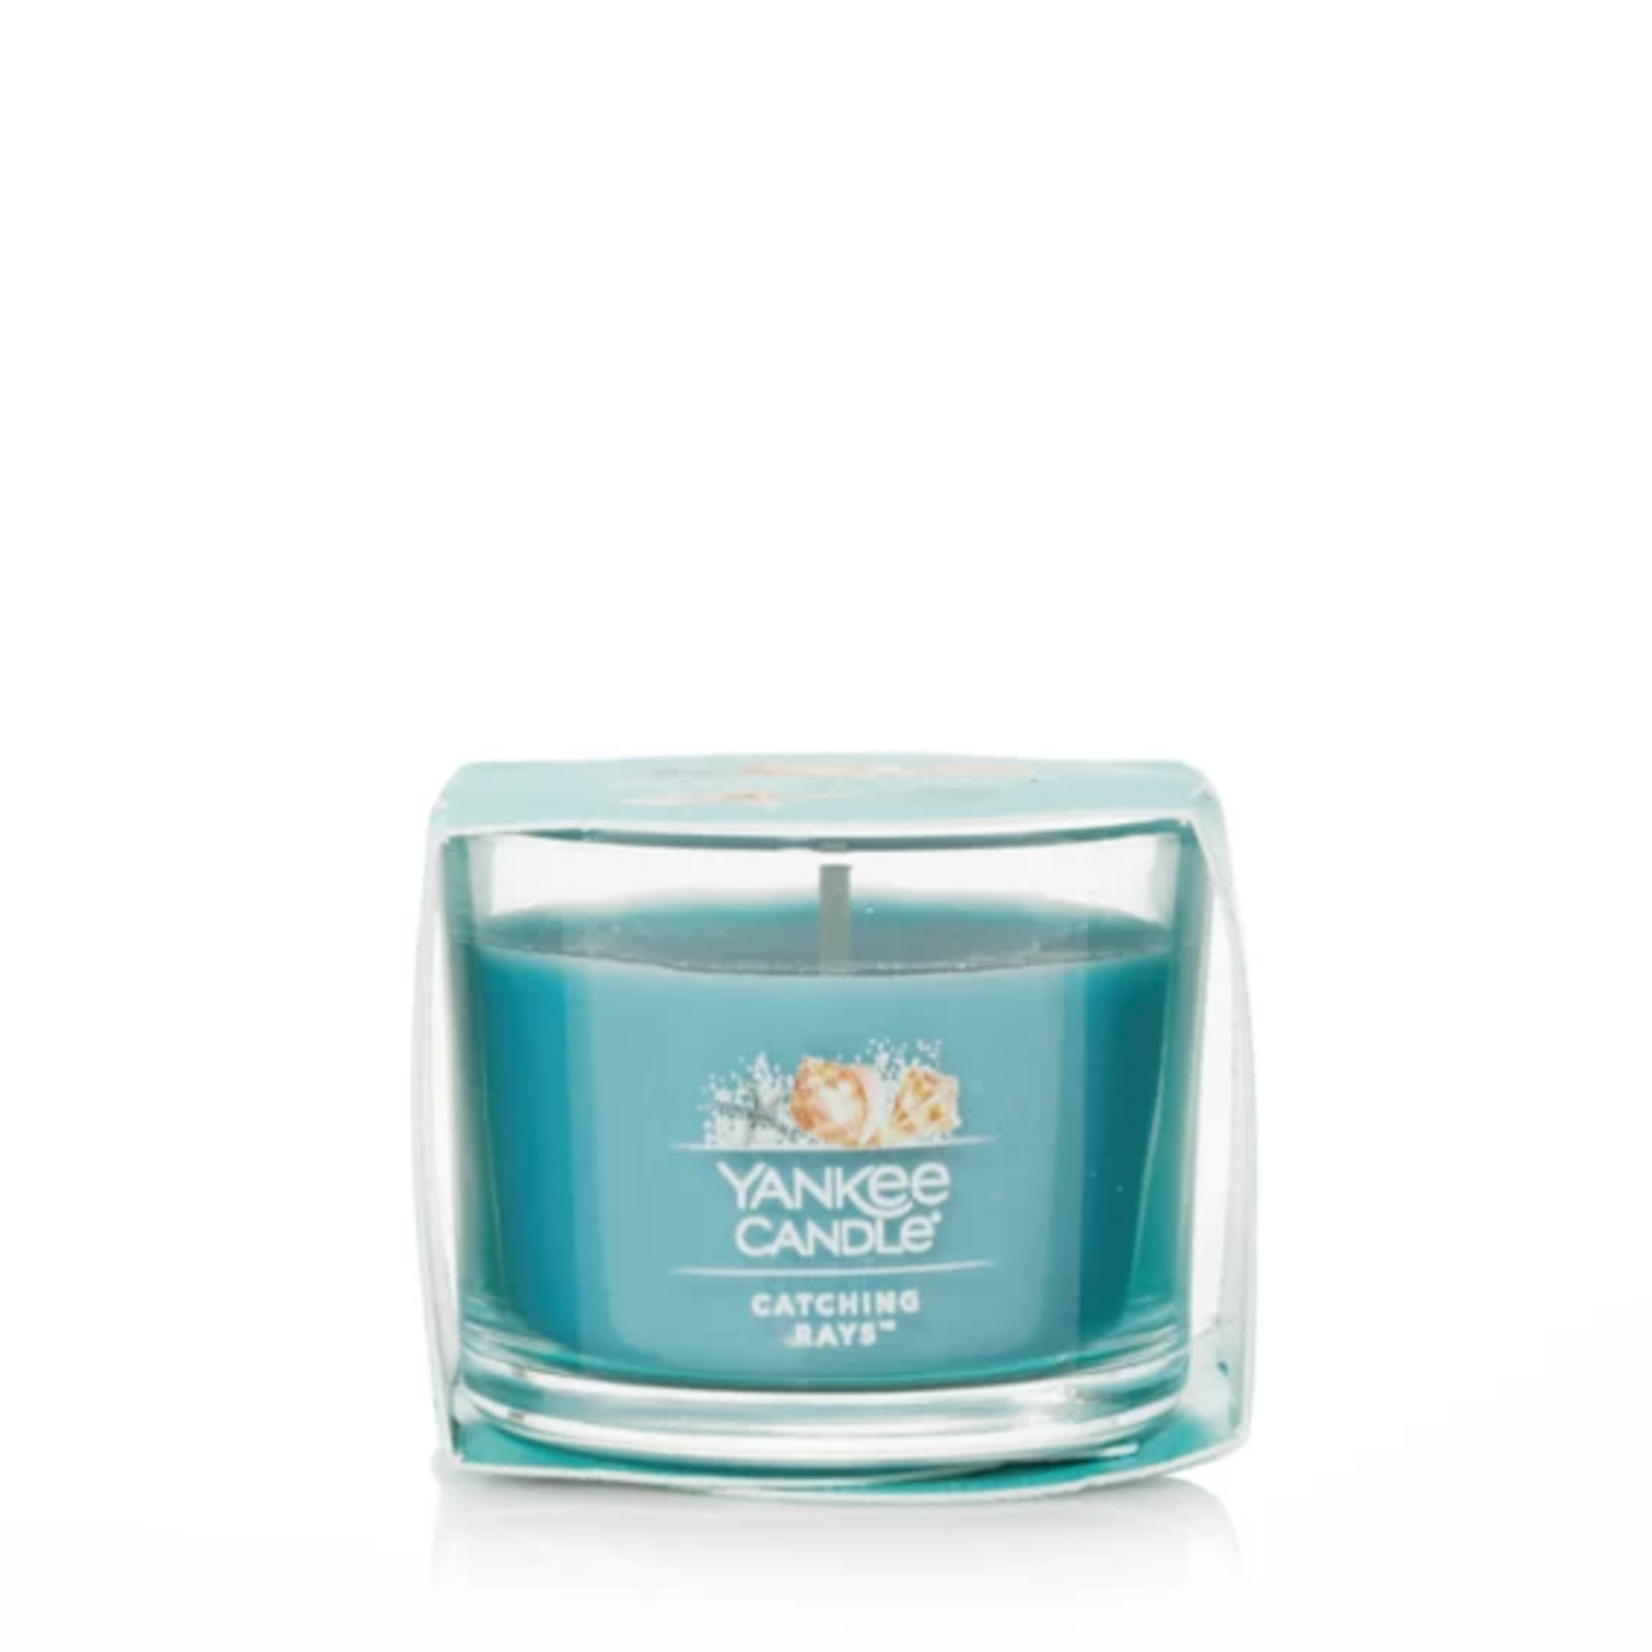 Yankee Candles Yankee Candles Catching Rays 1.3 oz | 1 Wick